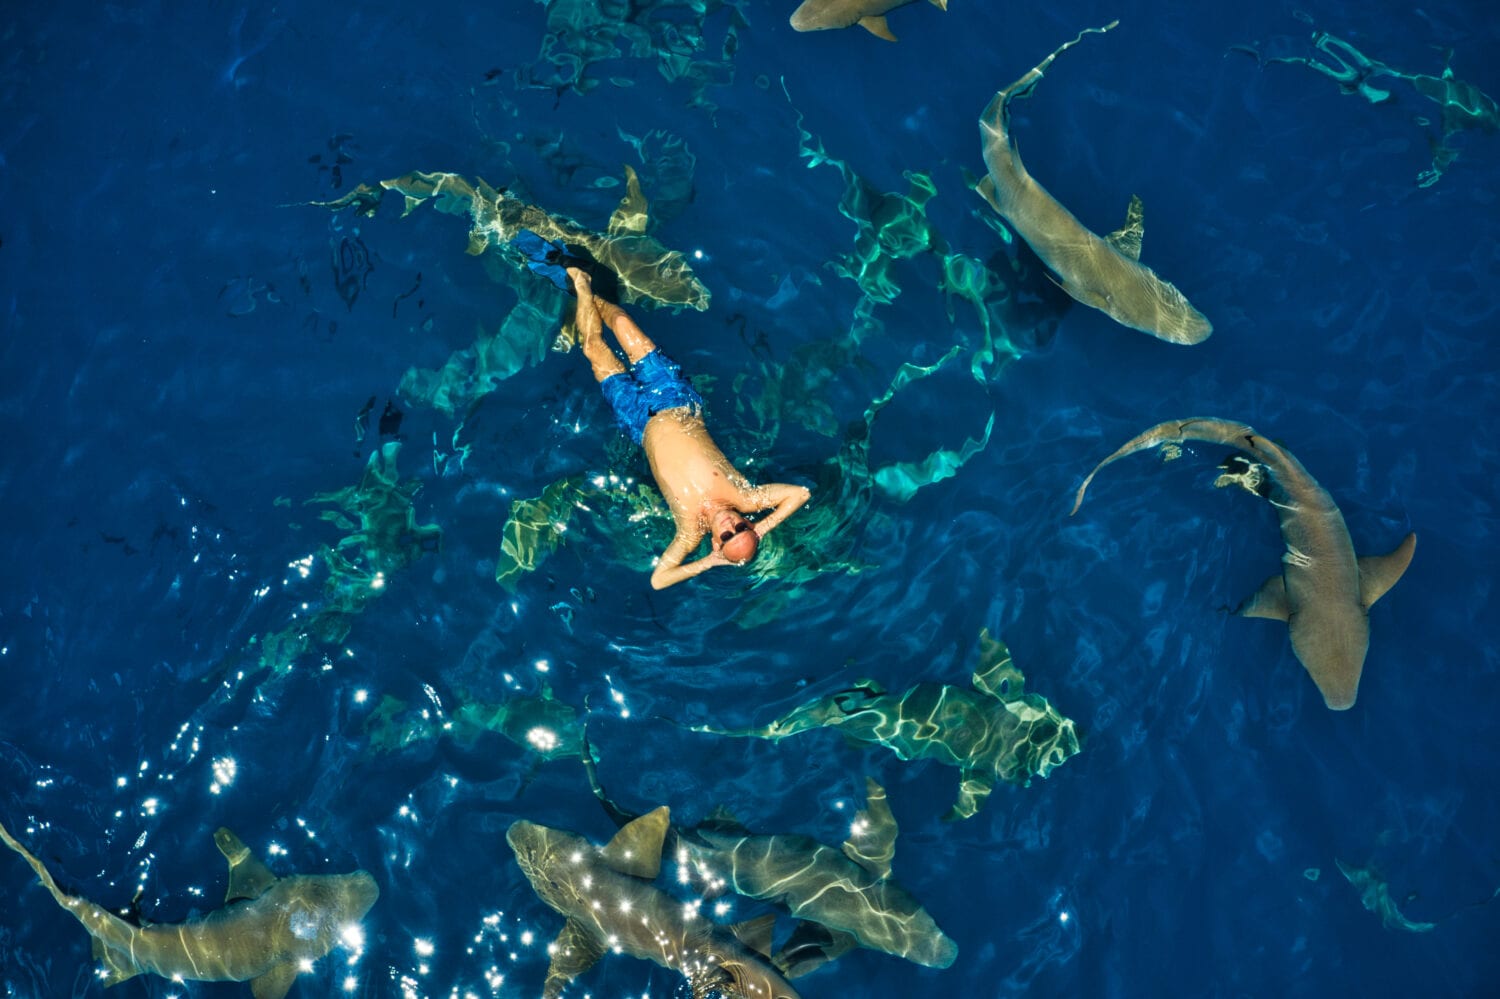 man in the middle of the ocean surrounded by sharks and sunbathing